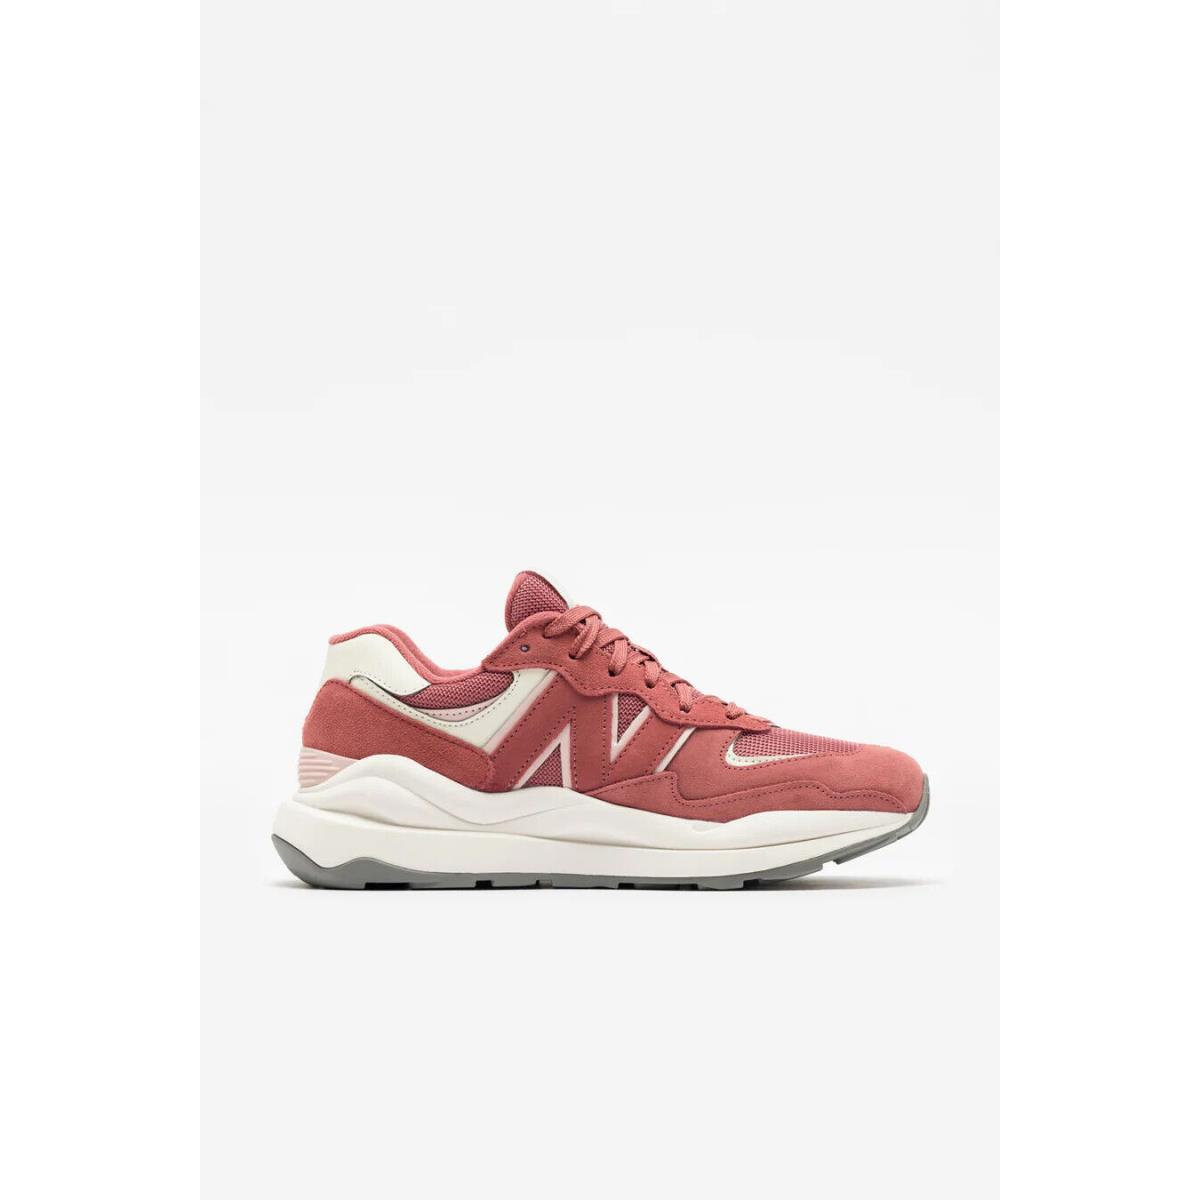 New Balance shoes  - Henna/Oyster Pink 5